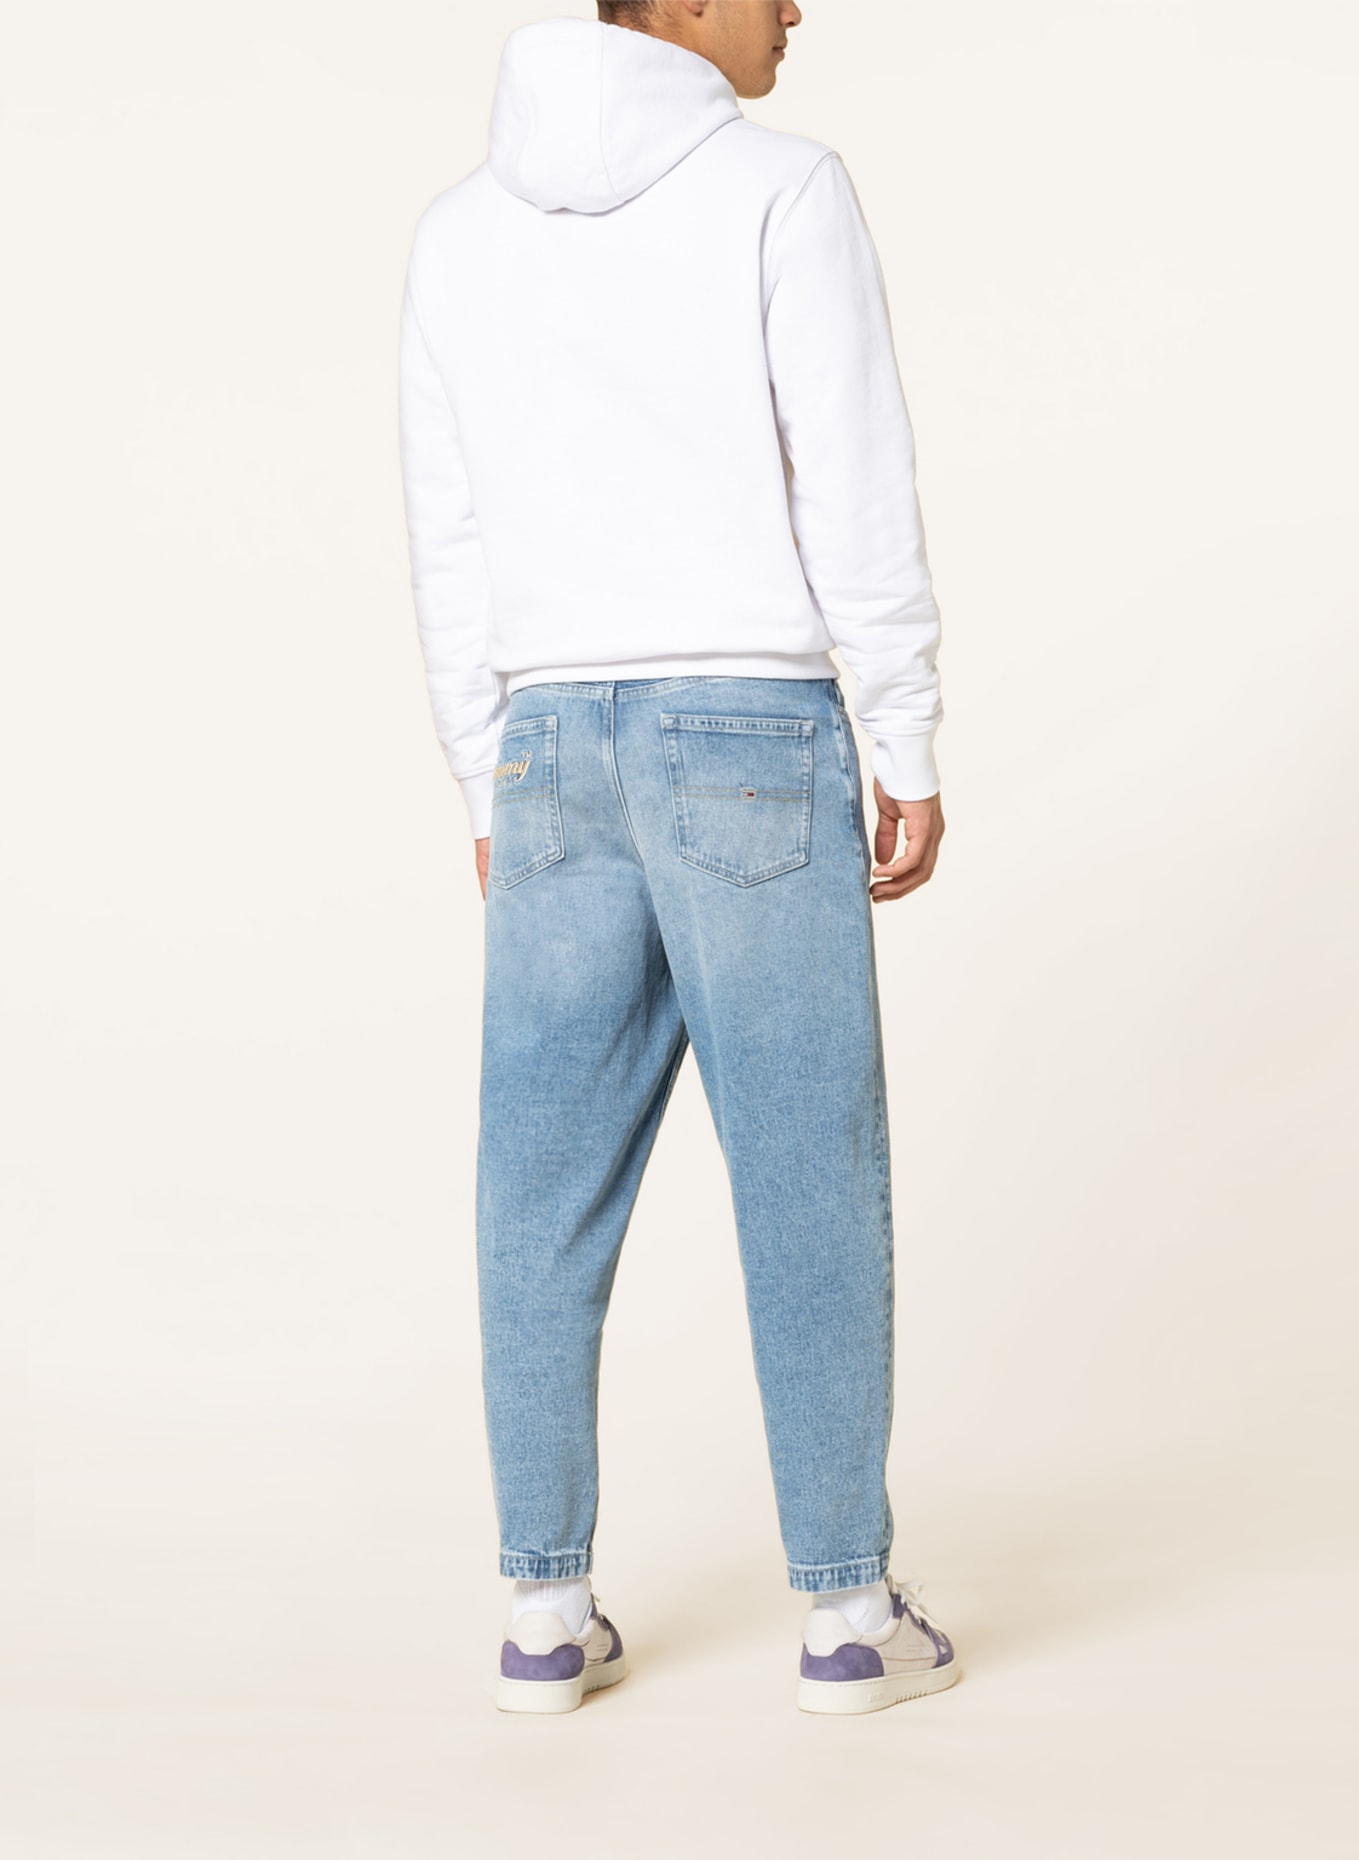 TOMMY JEANS Jeans BAX Loose Tapered Fit, Farbe: 1AB Denim Light (Bild 3)